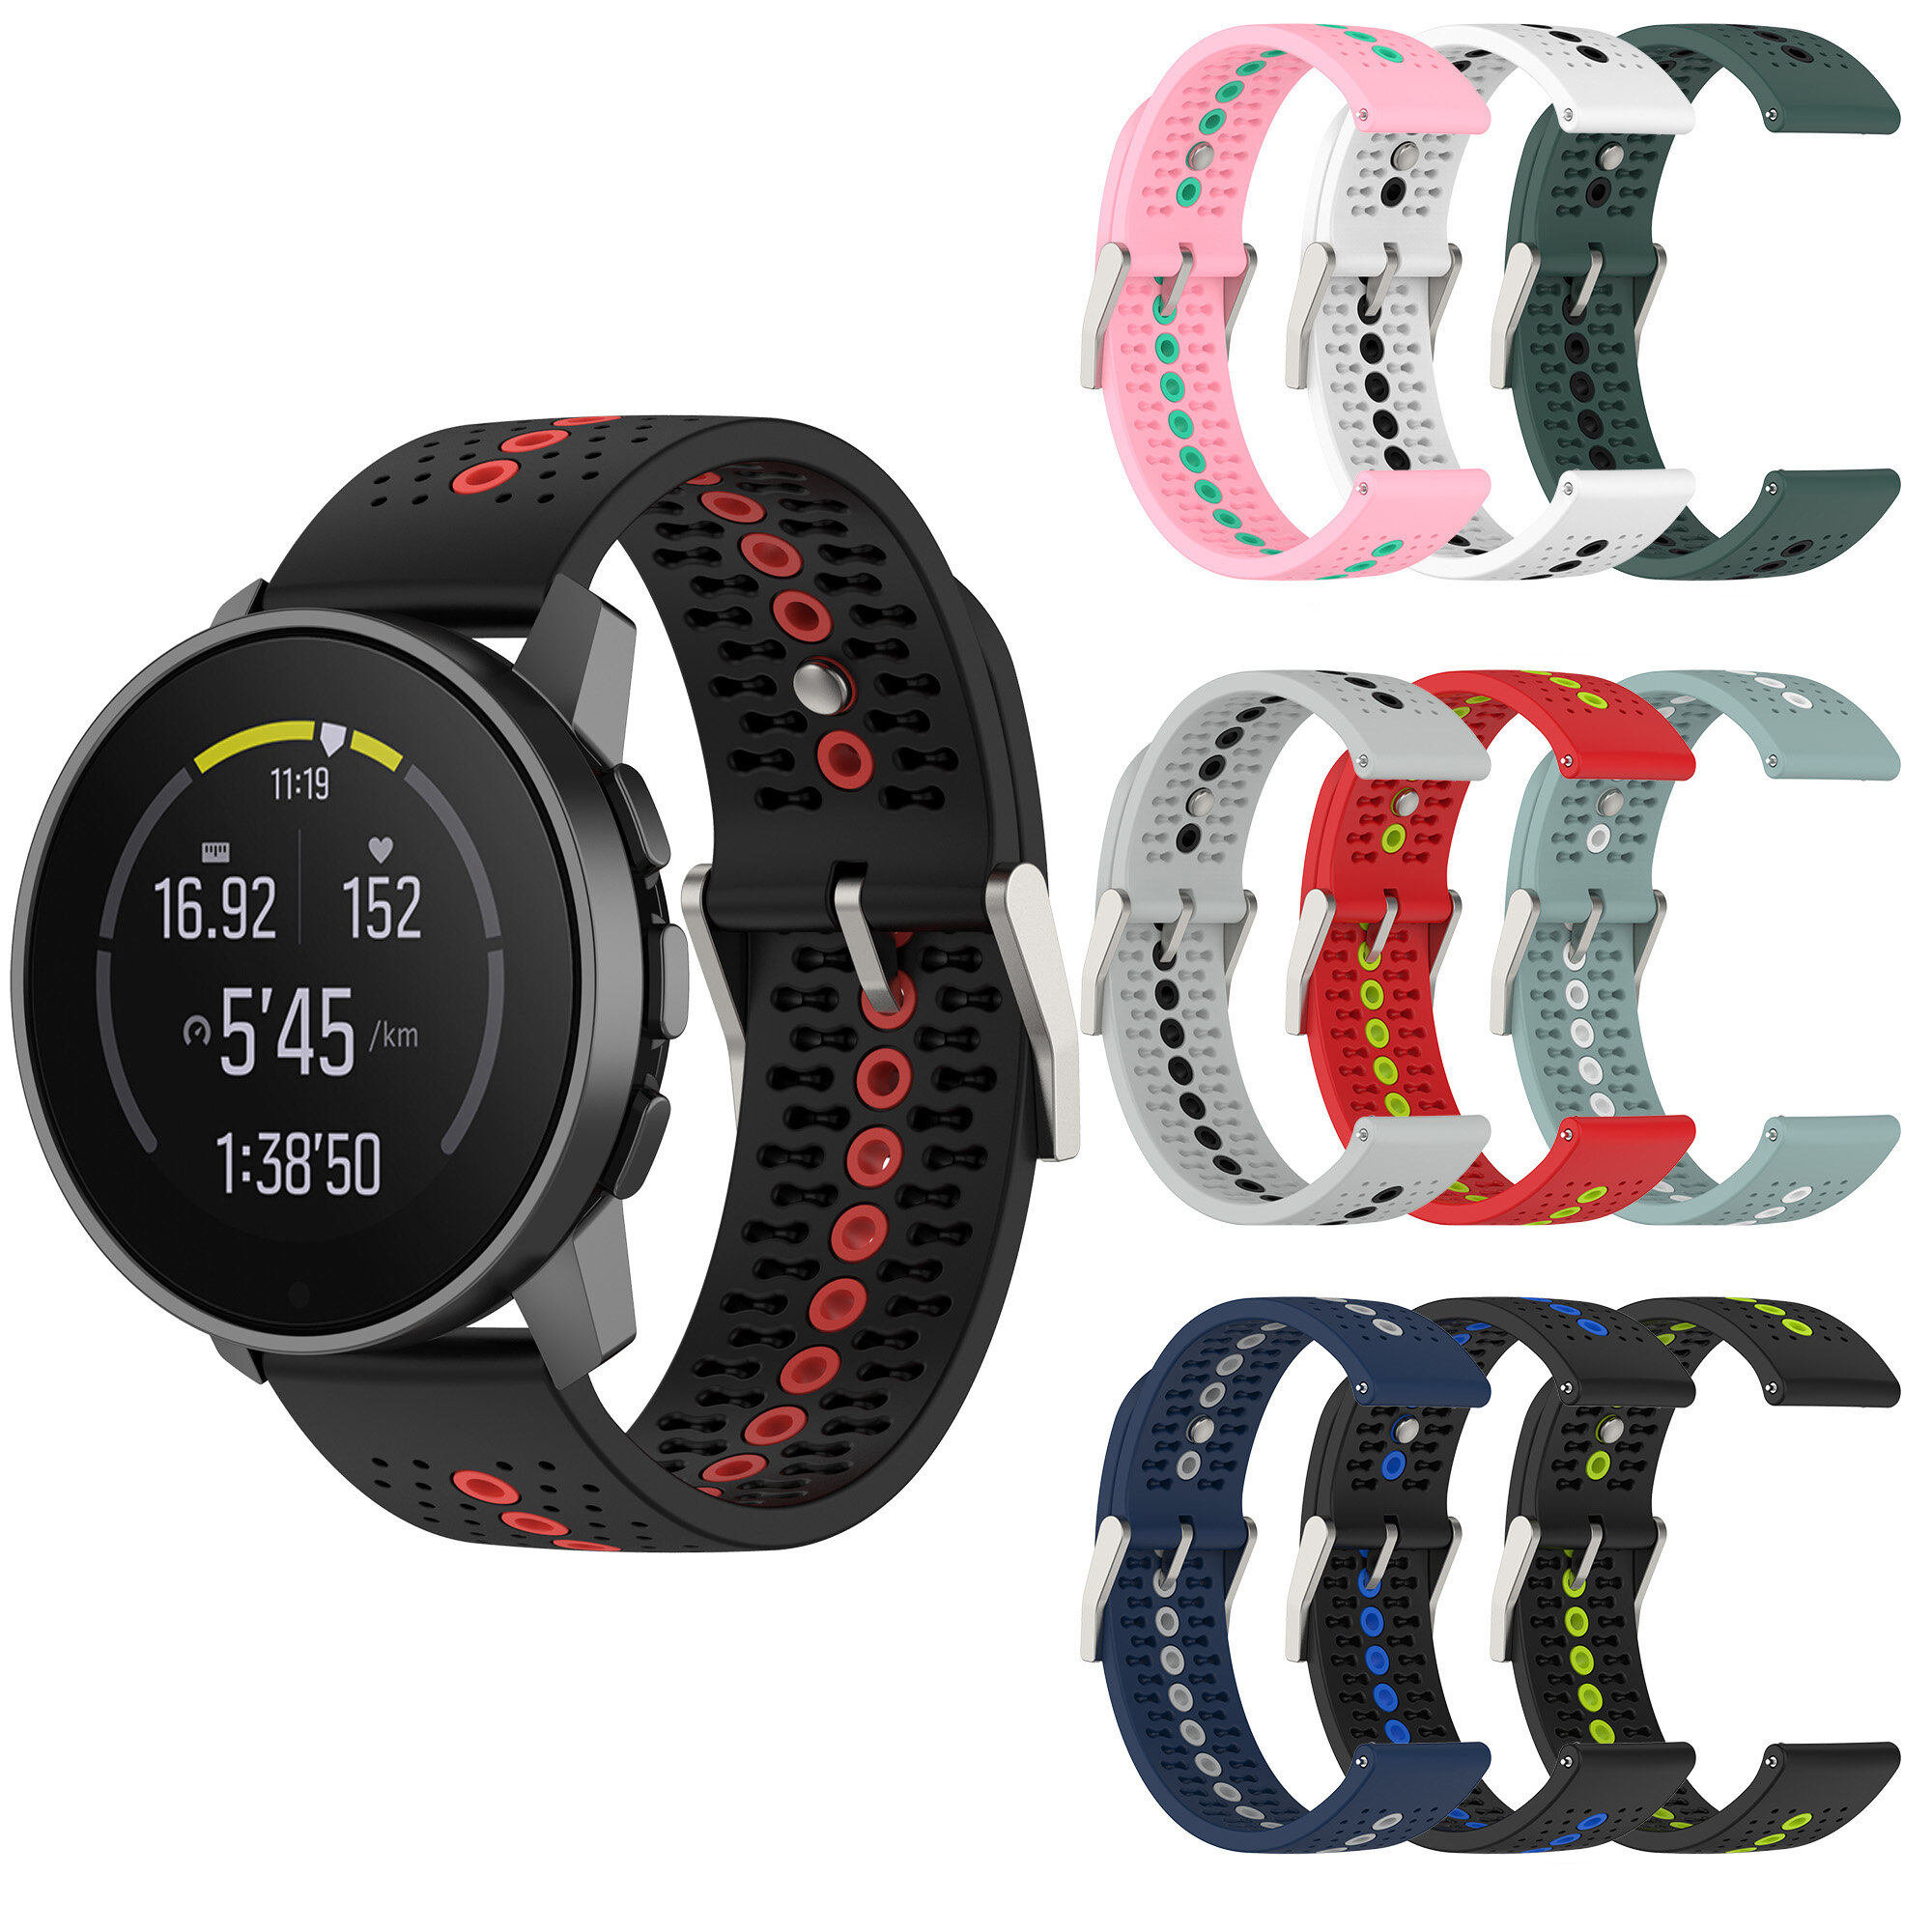 

Bakeey 22MM Colorful Silicone Smart Watch Band Strap Replacement for Suunto 9 Speak